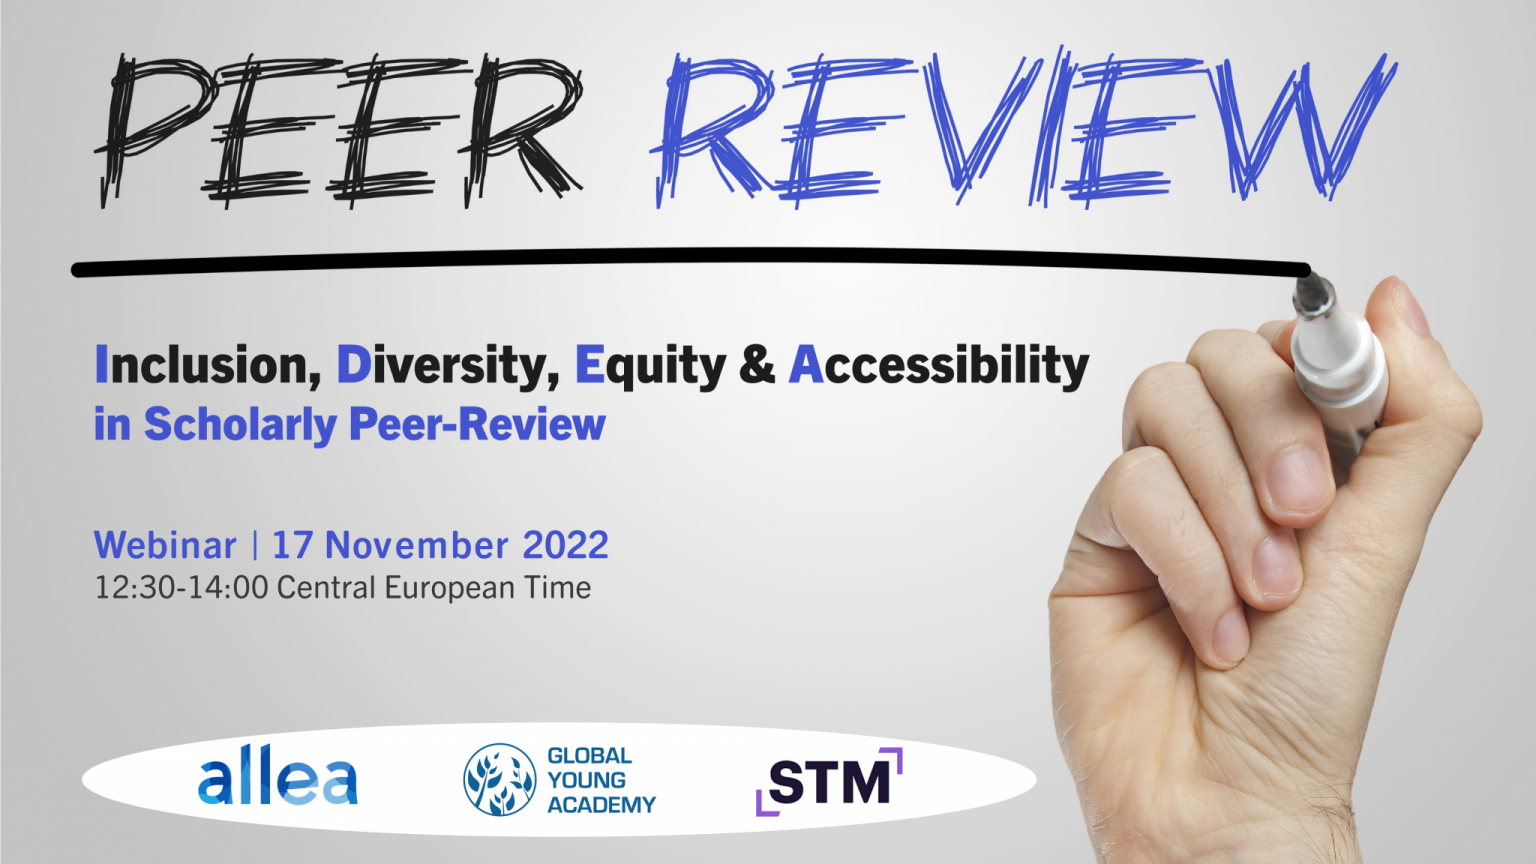 Inclusion, Diversity, Equity & Accessibility in Scholarly Peer-Review